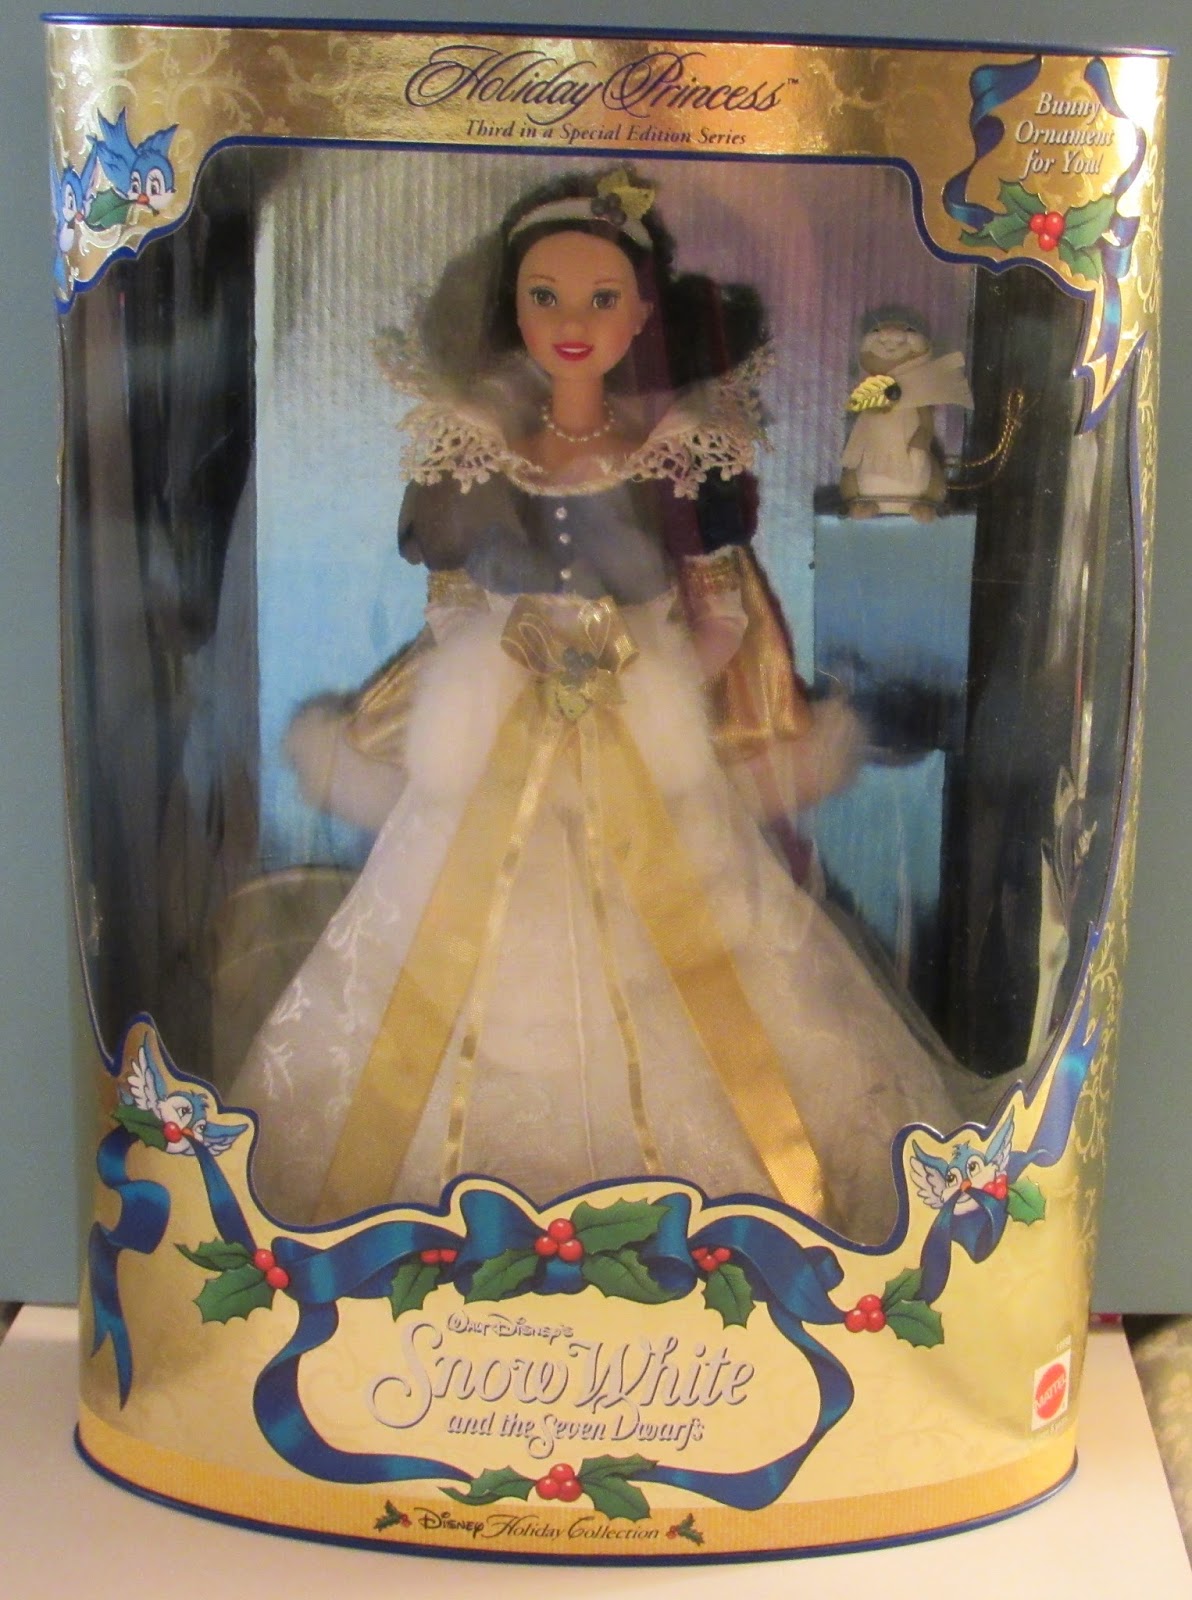 A Focus on the Cute: Disney's Holiday Princess Snow White 1998 